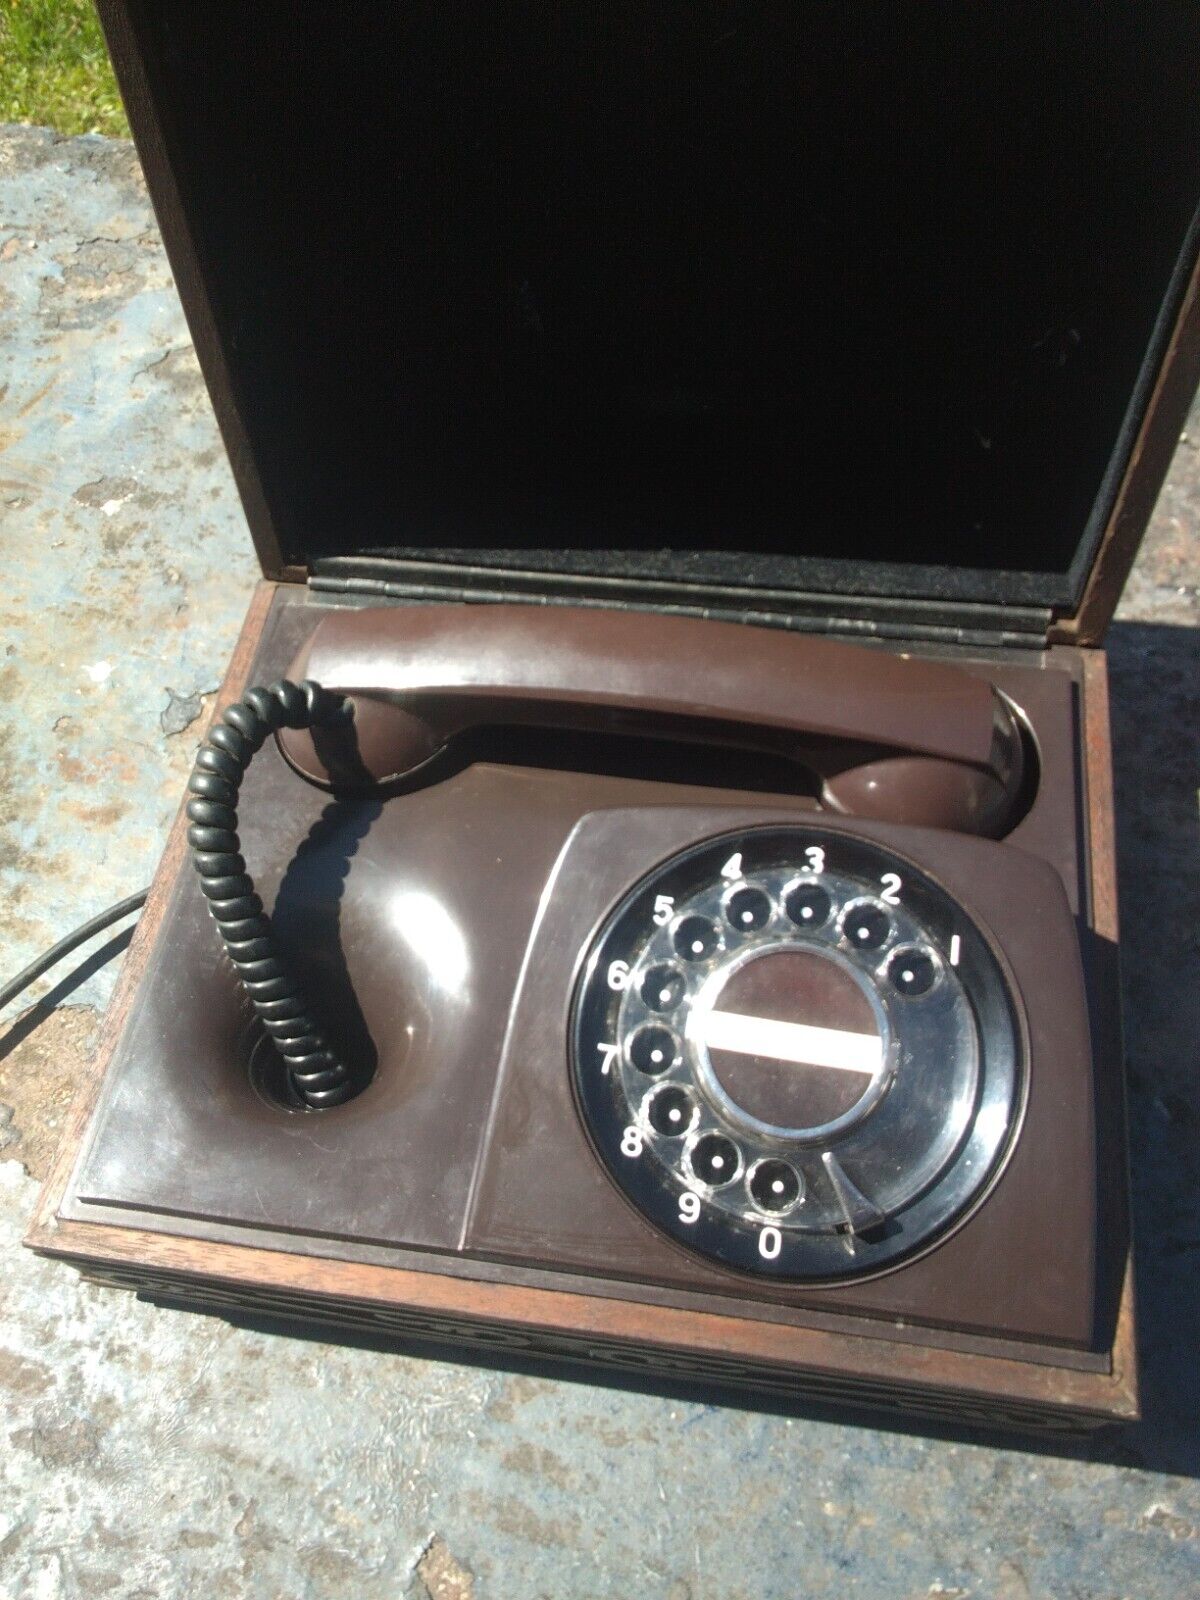 Vintage Western Electric Rotary Phone In A Wooden Box